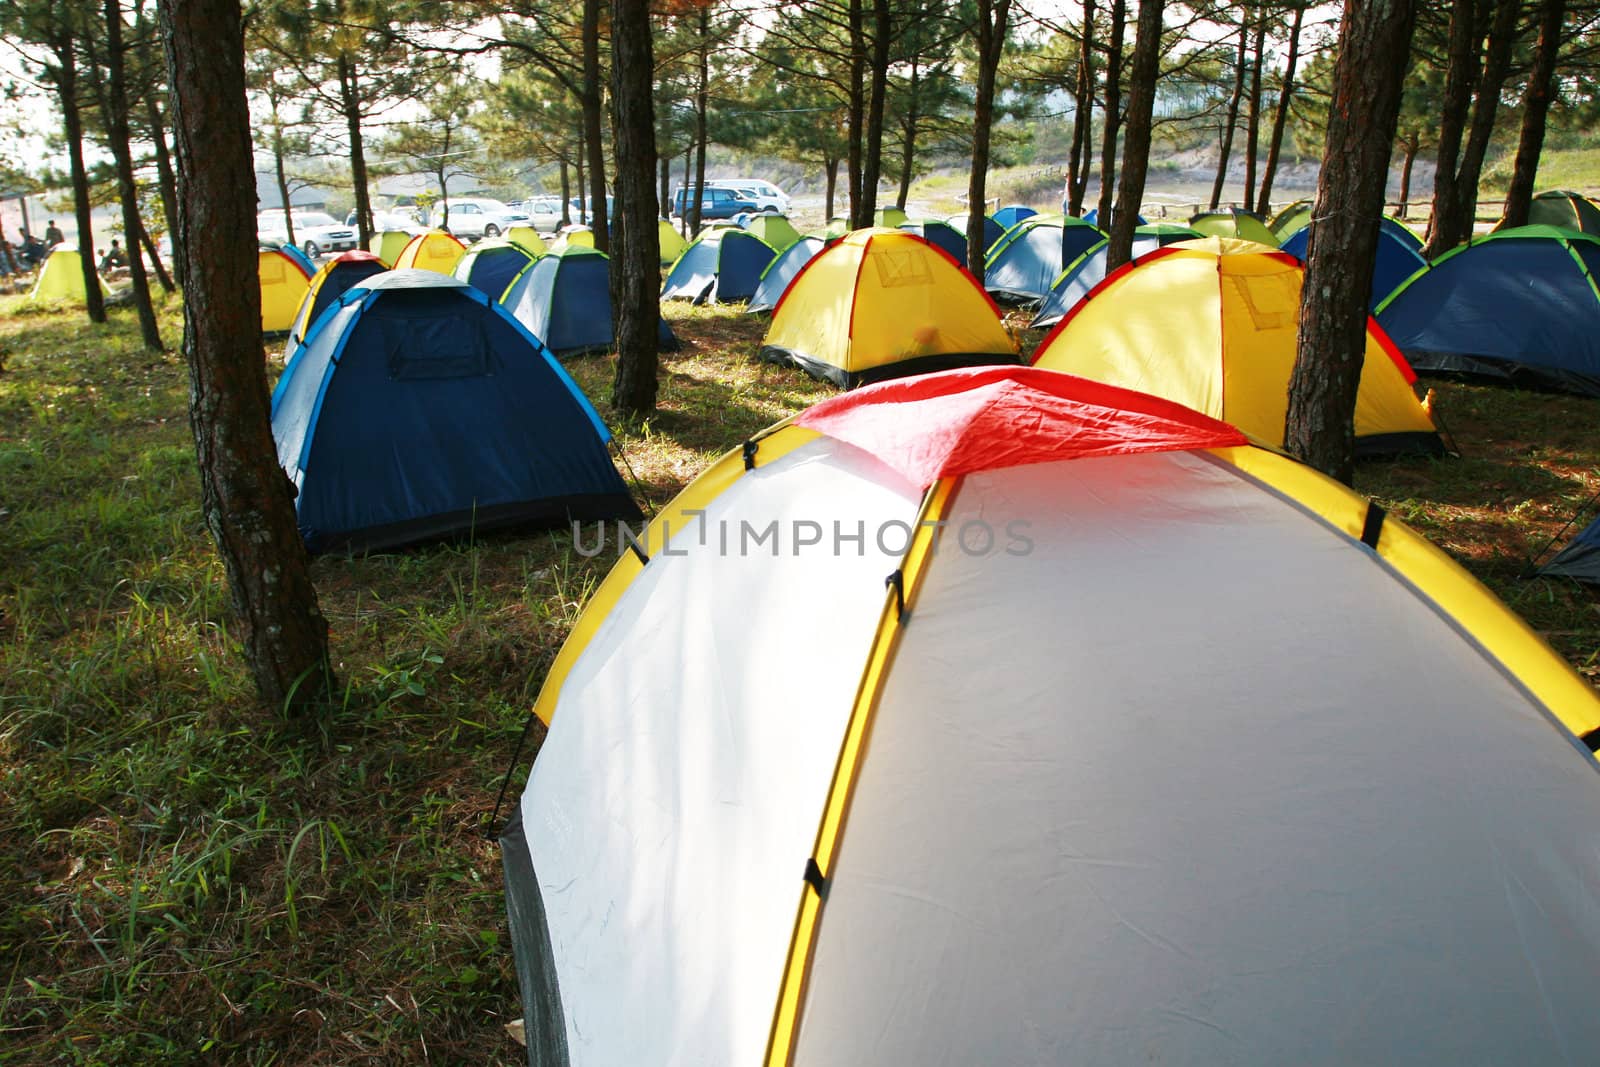 A group of tents by foto76